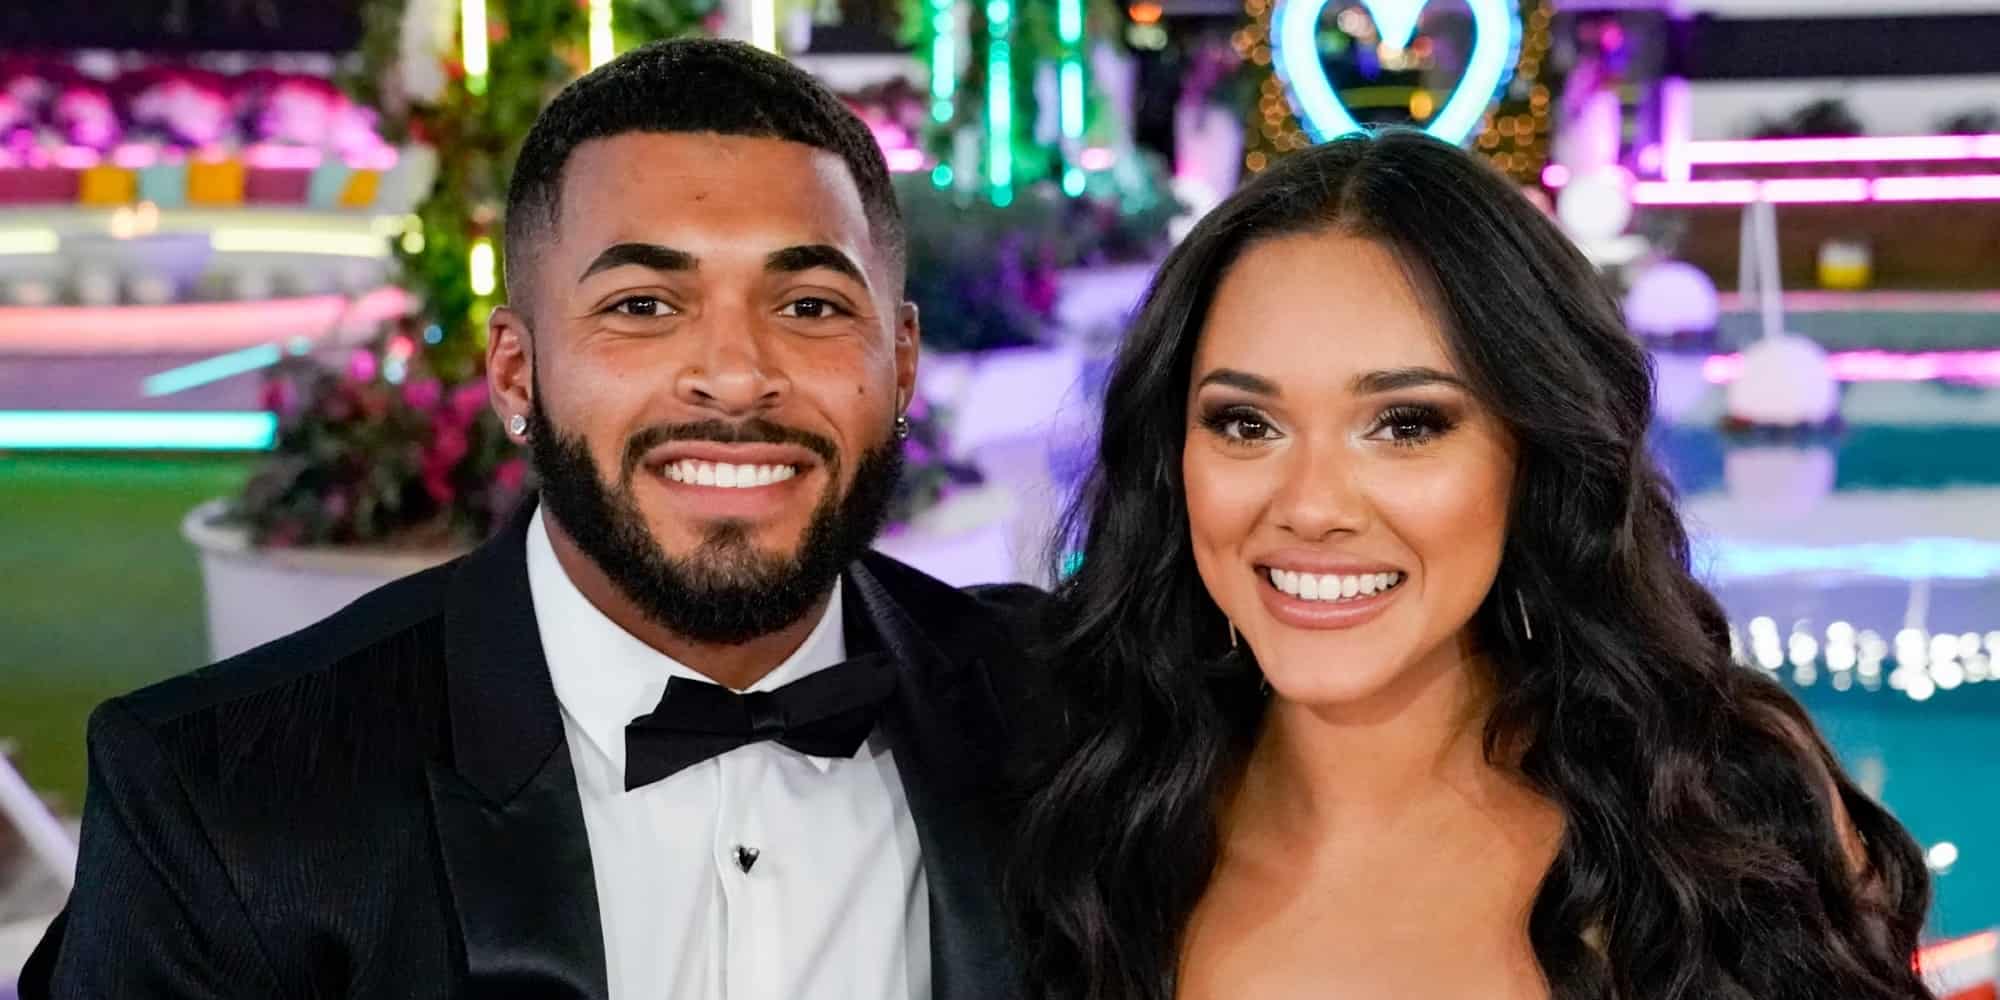 Cely Vasquez and Johnny Middlebrooks, second couple from the show, Love Island USA Season 2 (Credits: CBS)